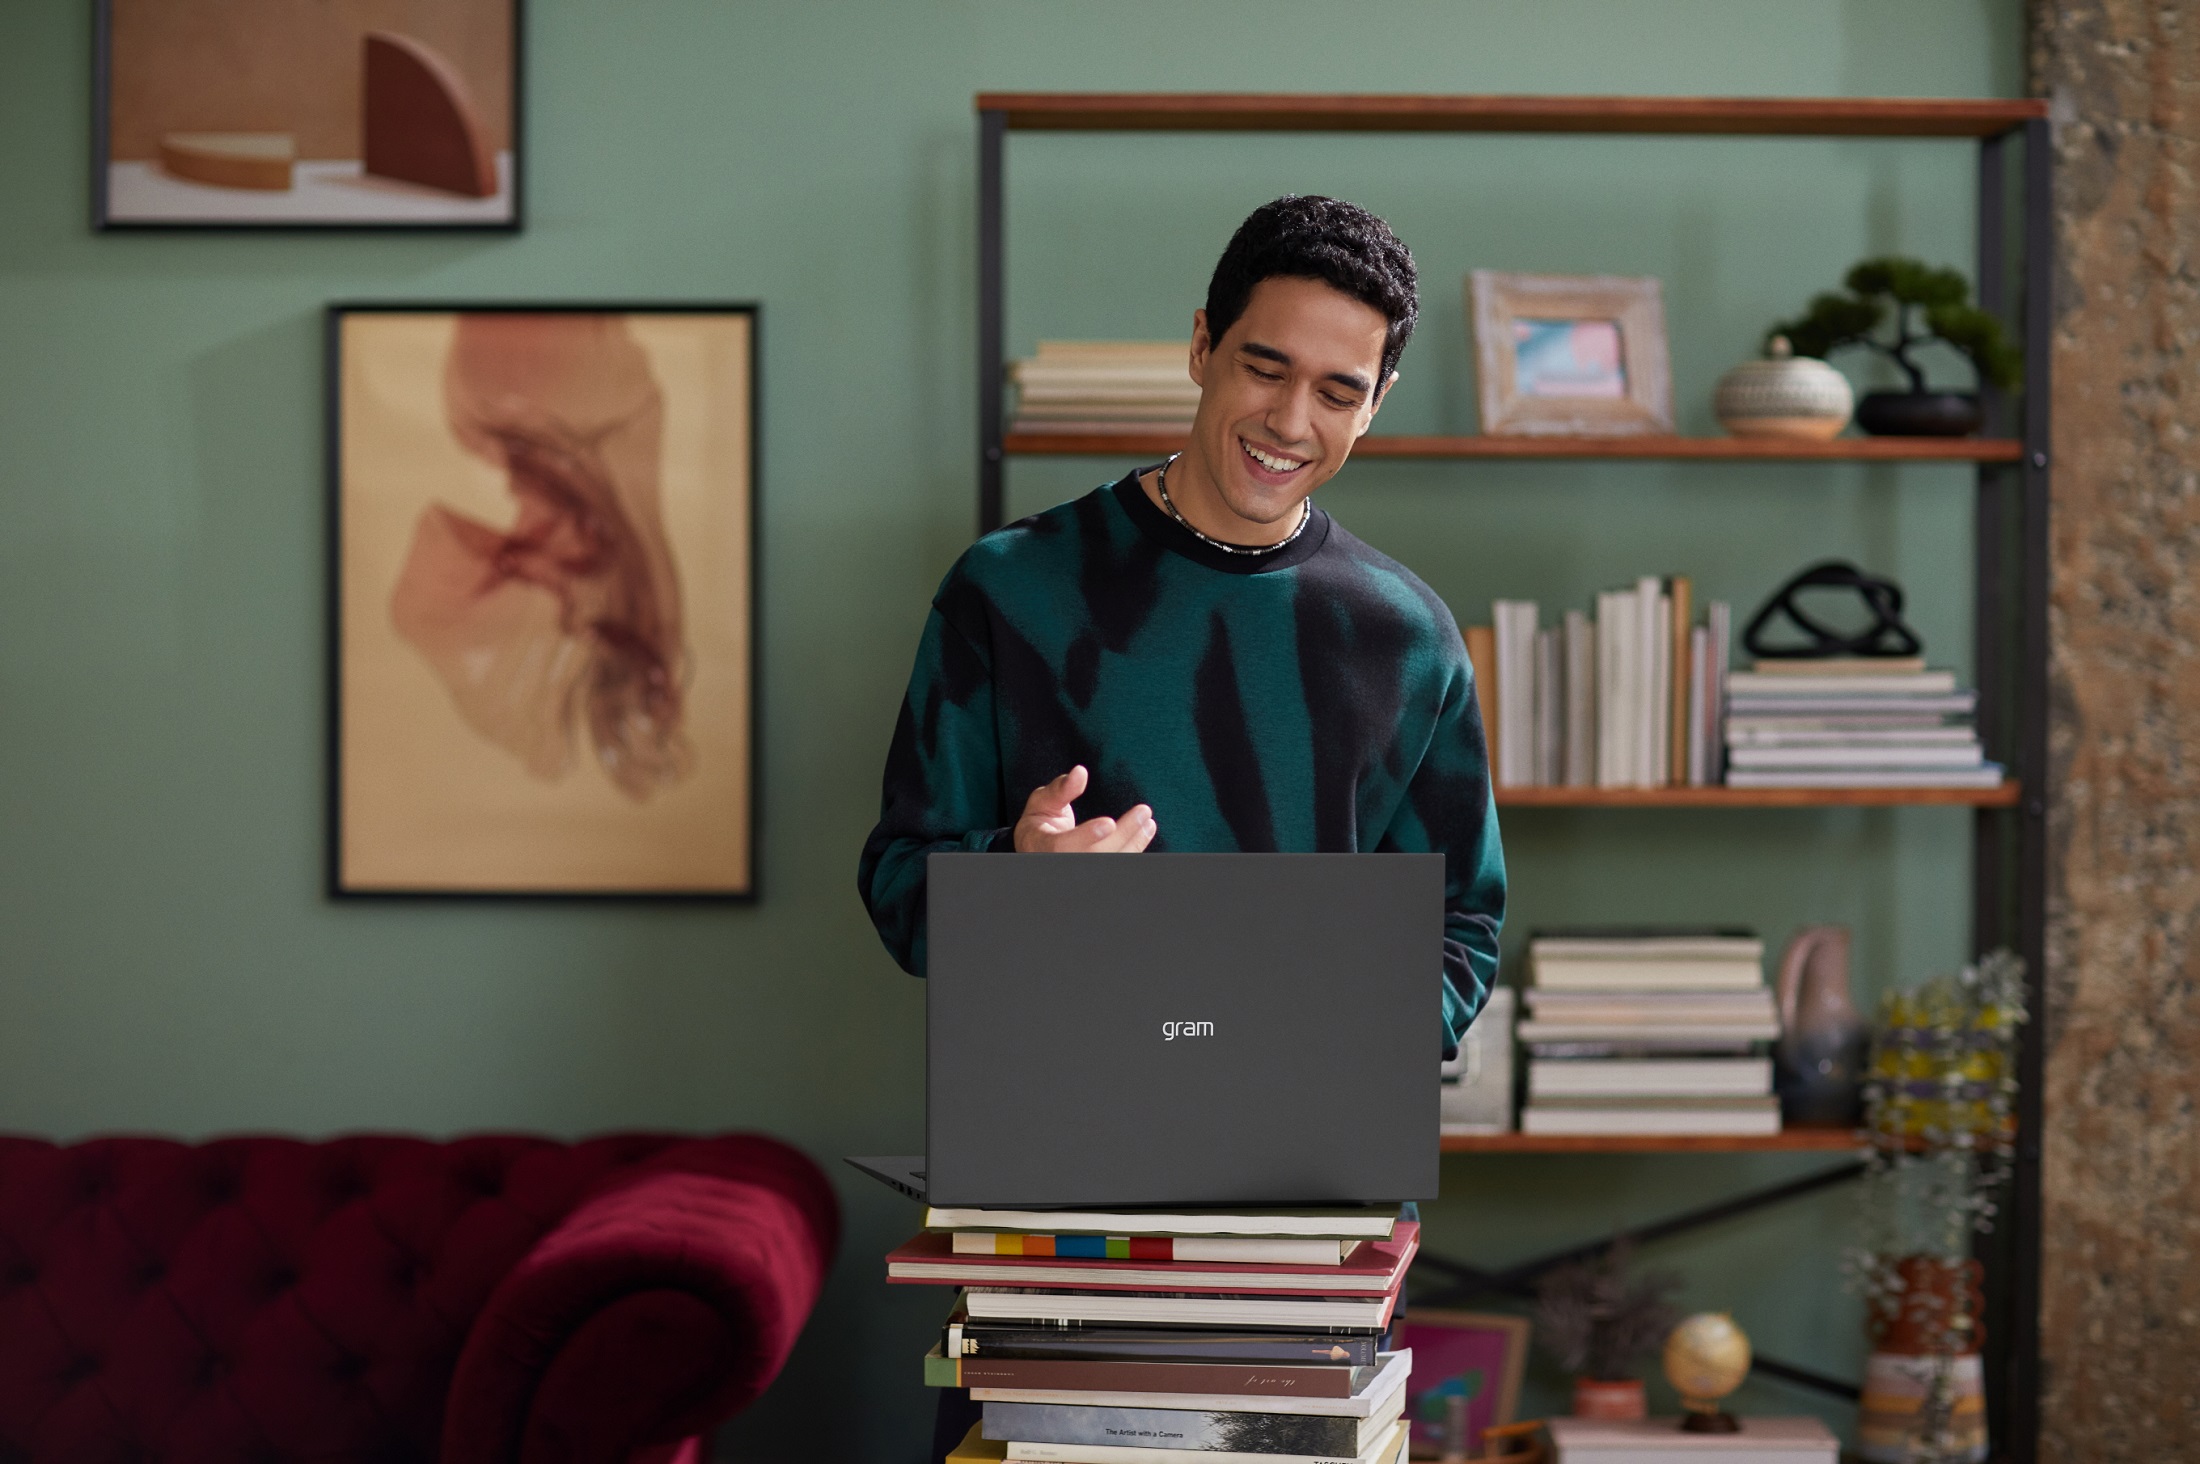 LG unveiled Gram Style and Gram Ultraslim laptops with Intel Raptor Lake processors and Iris Xe graphics